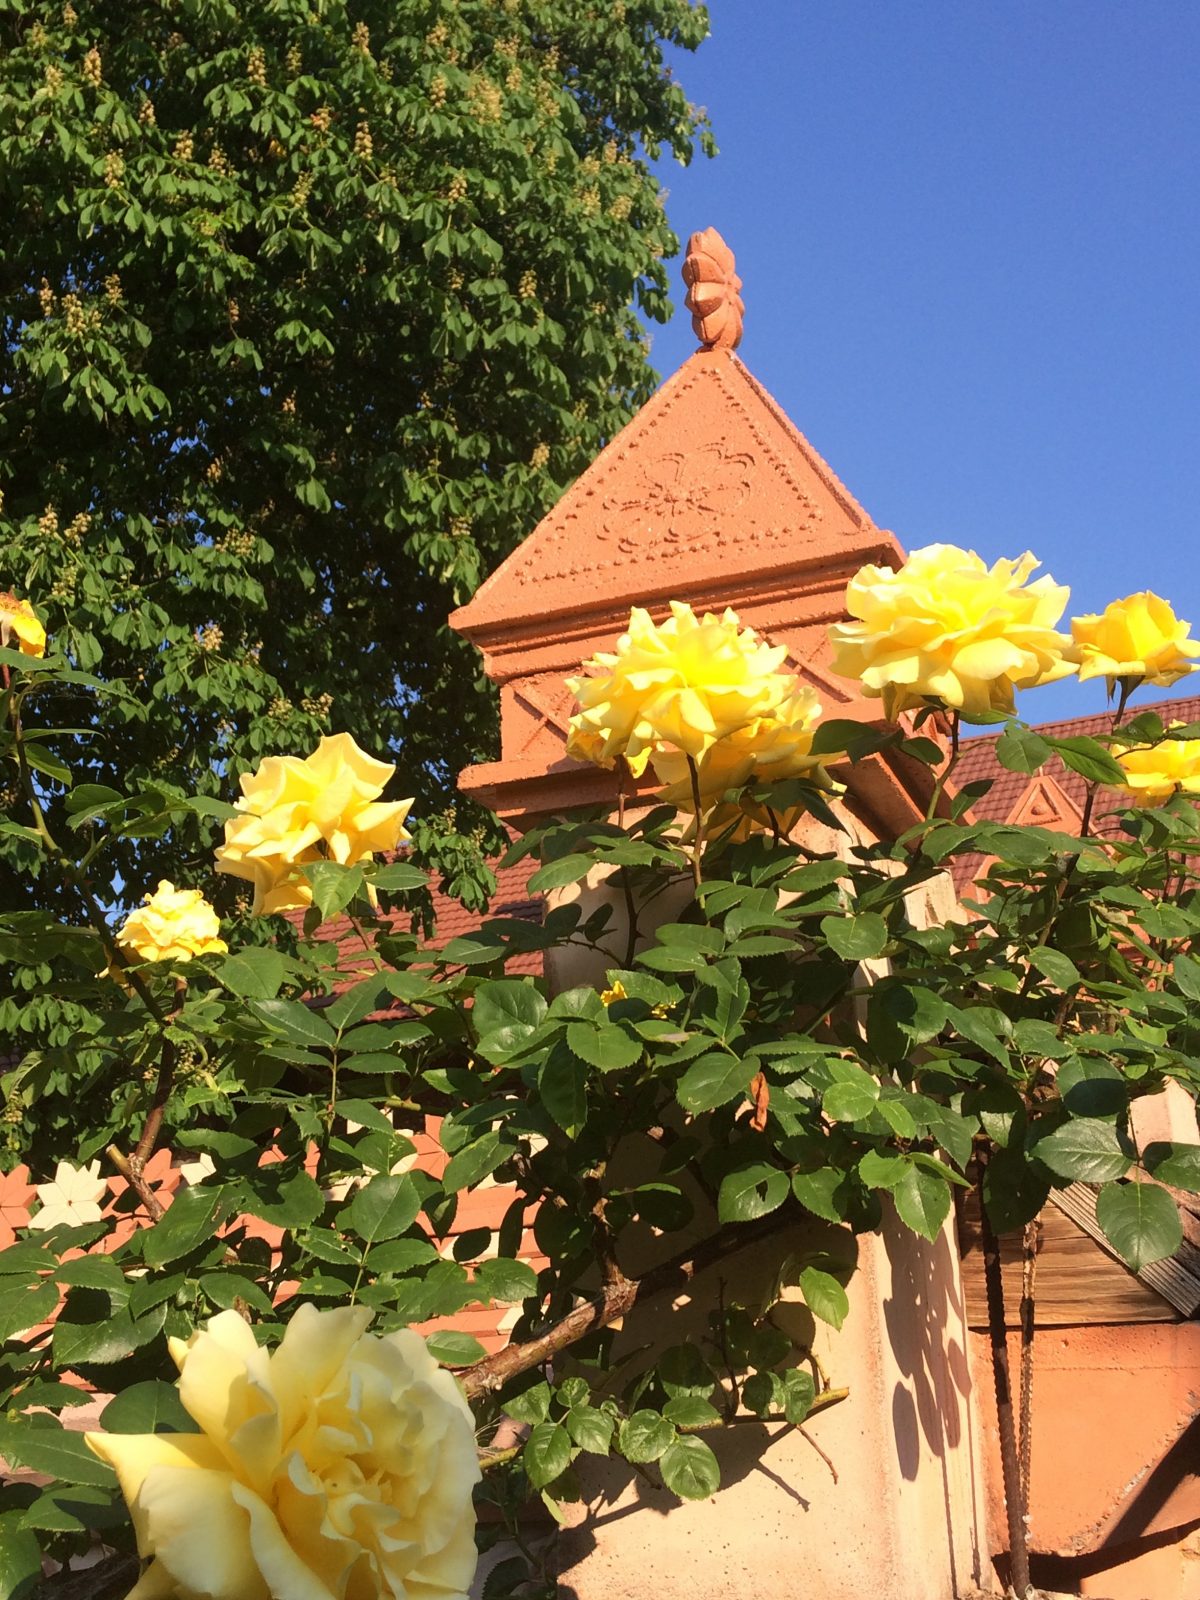 roses storming the bell towers